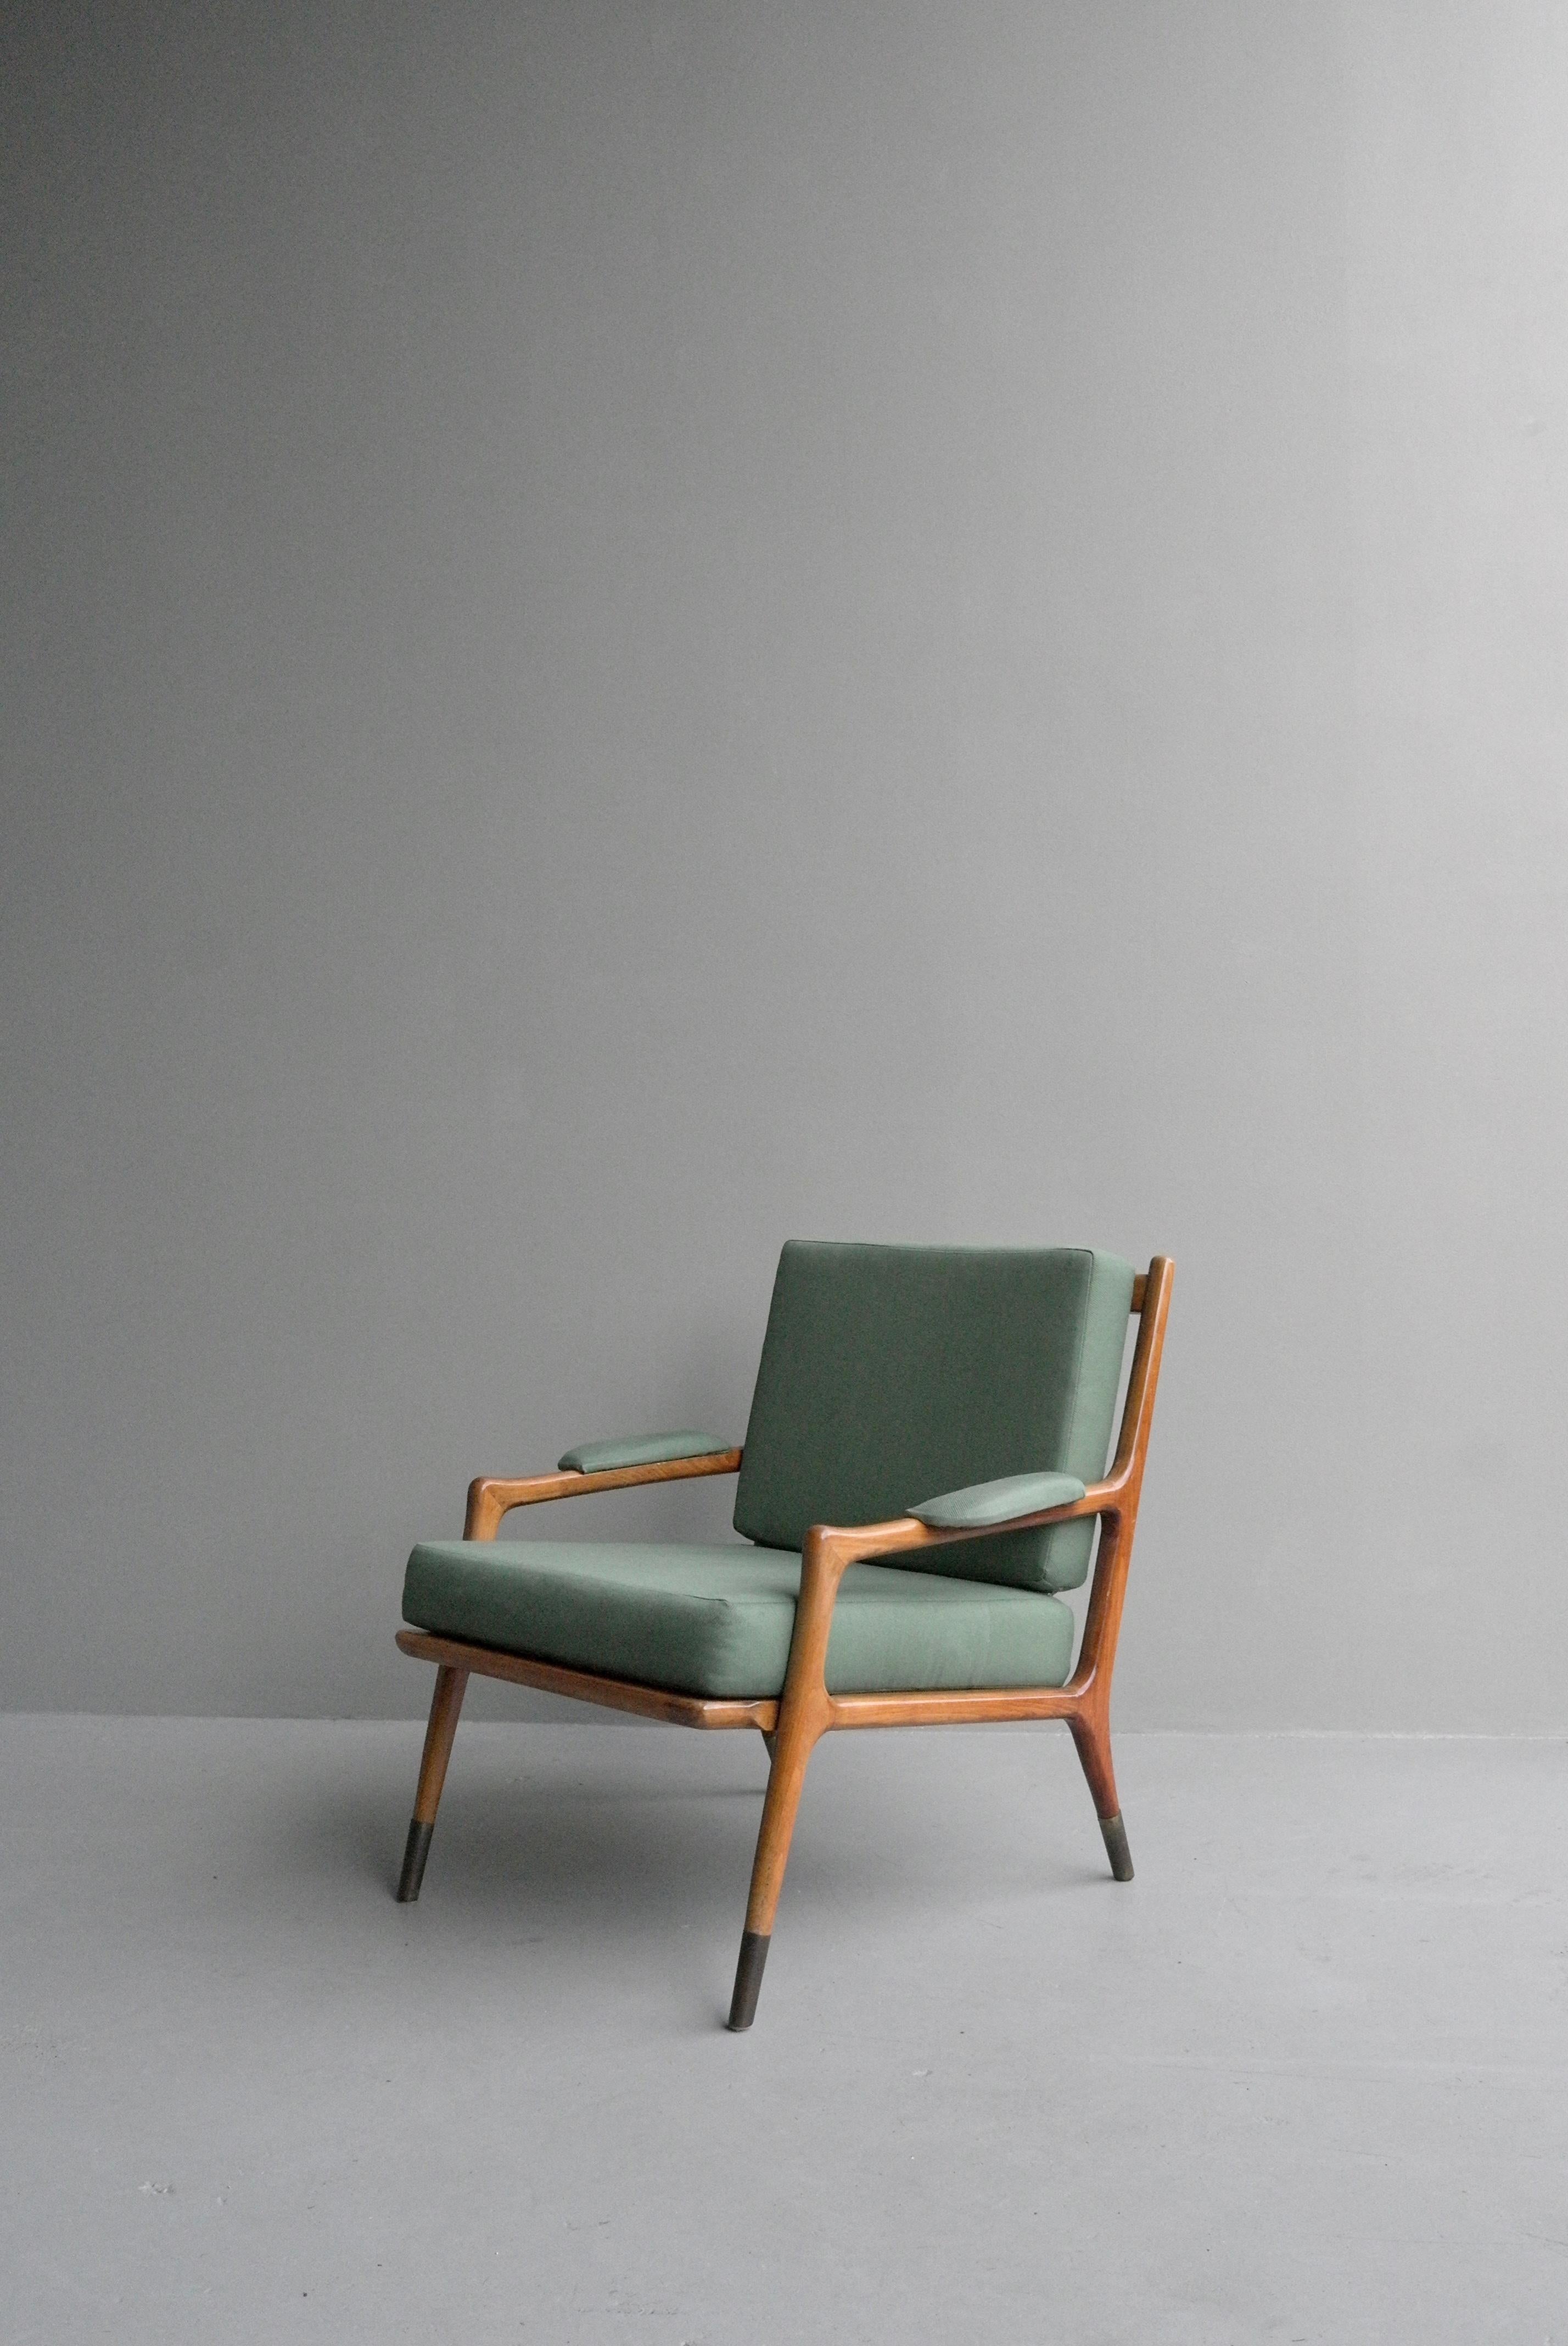 Mid-20th Century Gio Ponti Style Lounge Chair, Fine Brass Feet and Green Upholstery, Italy, 1955 For Sale